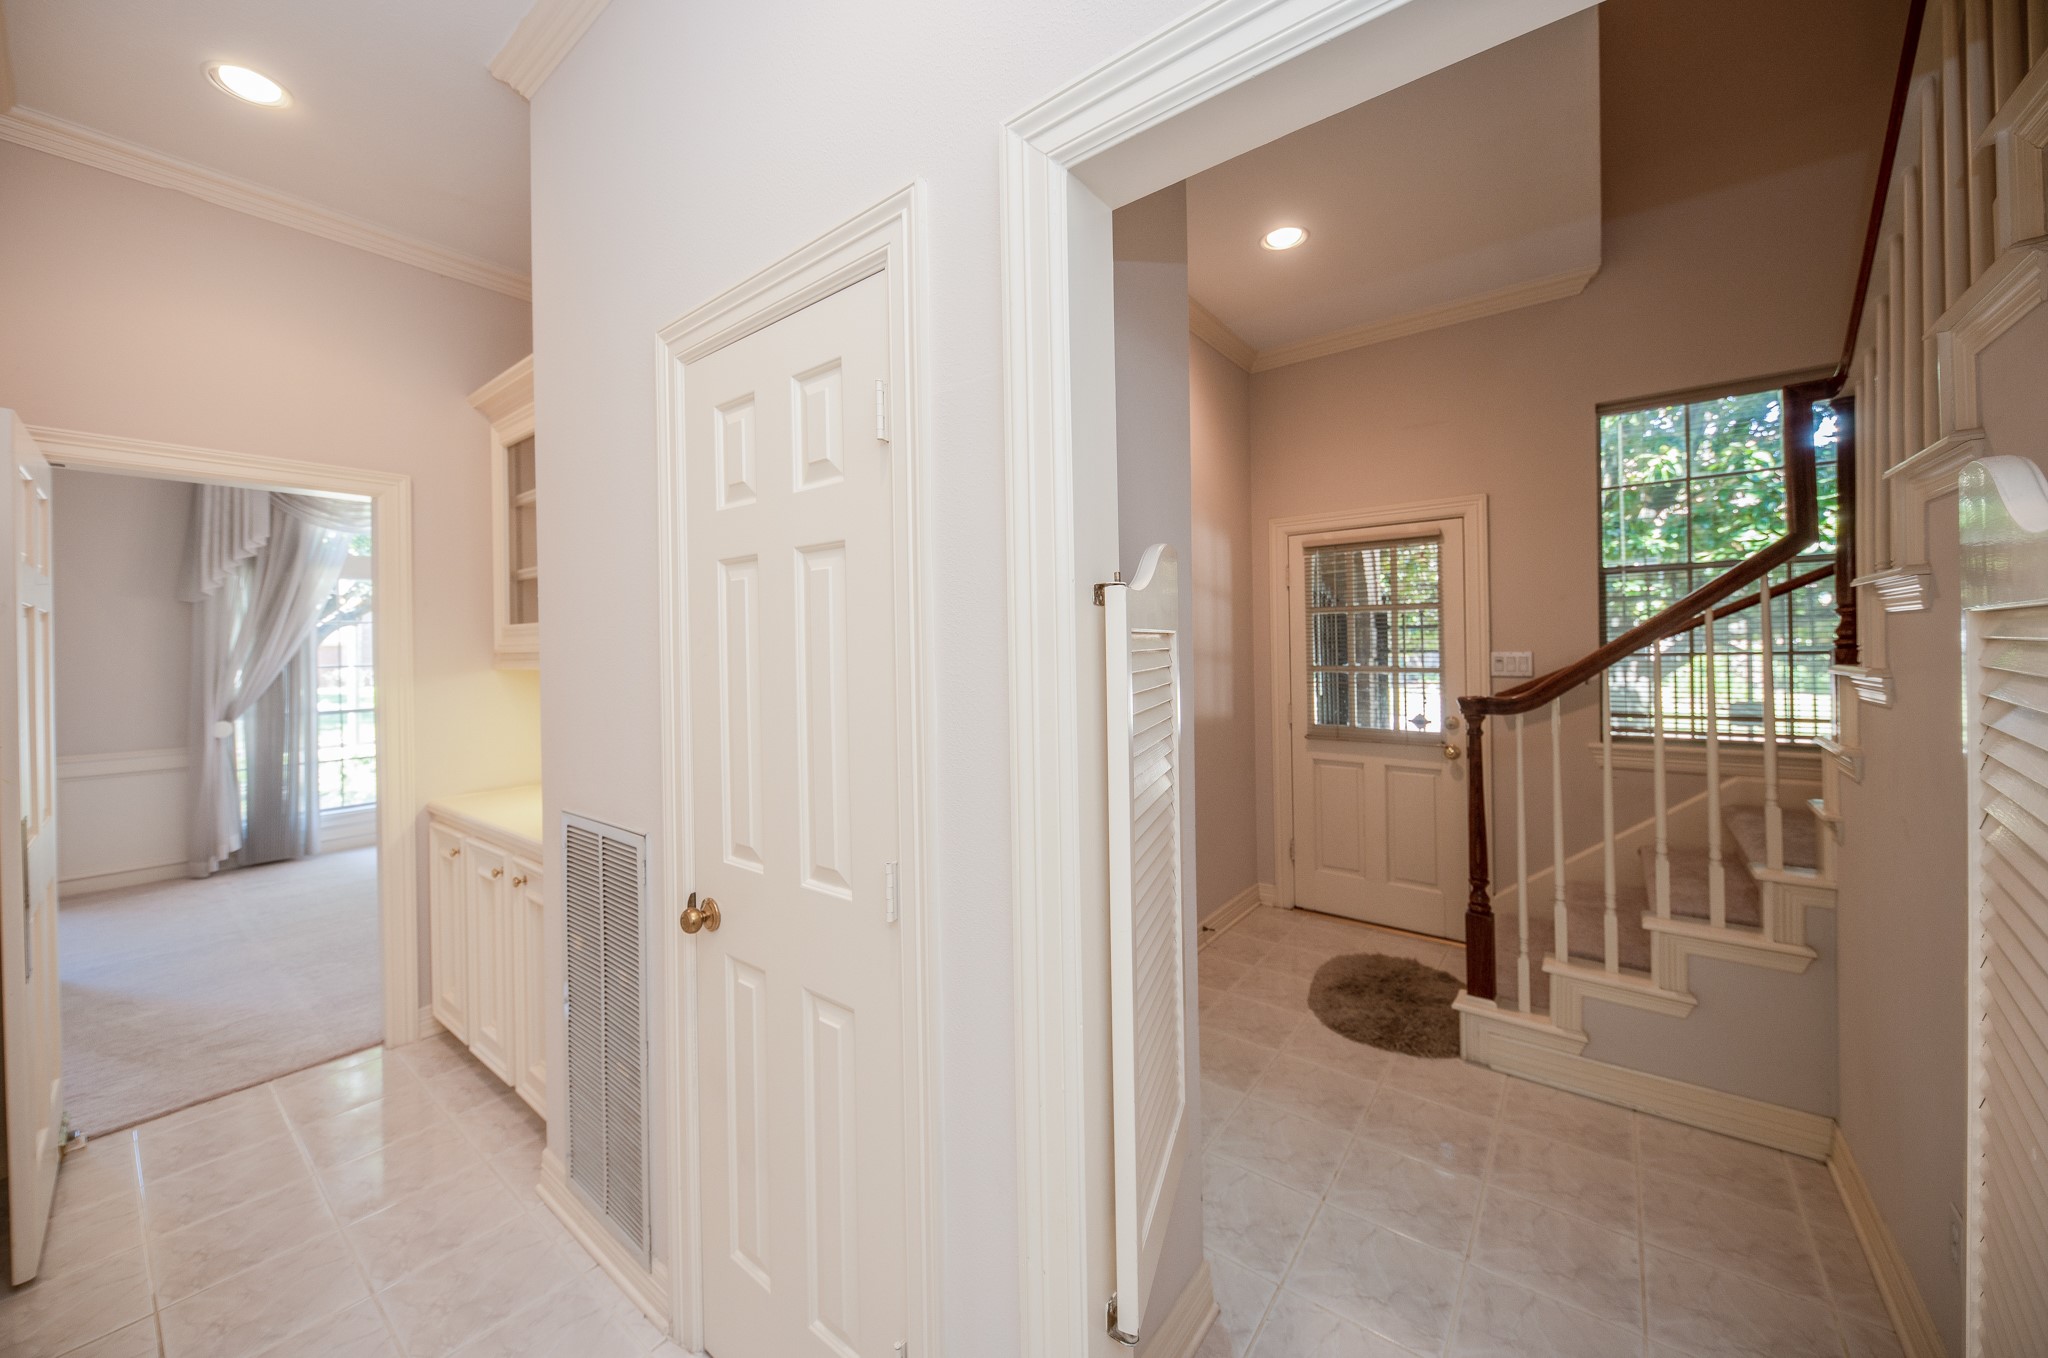 View of butlers pantry and side door with easy access to laundry room and back stair case. Convenient when carrying in groceries.